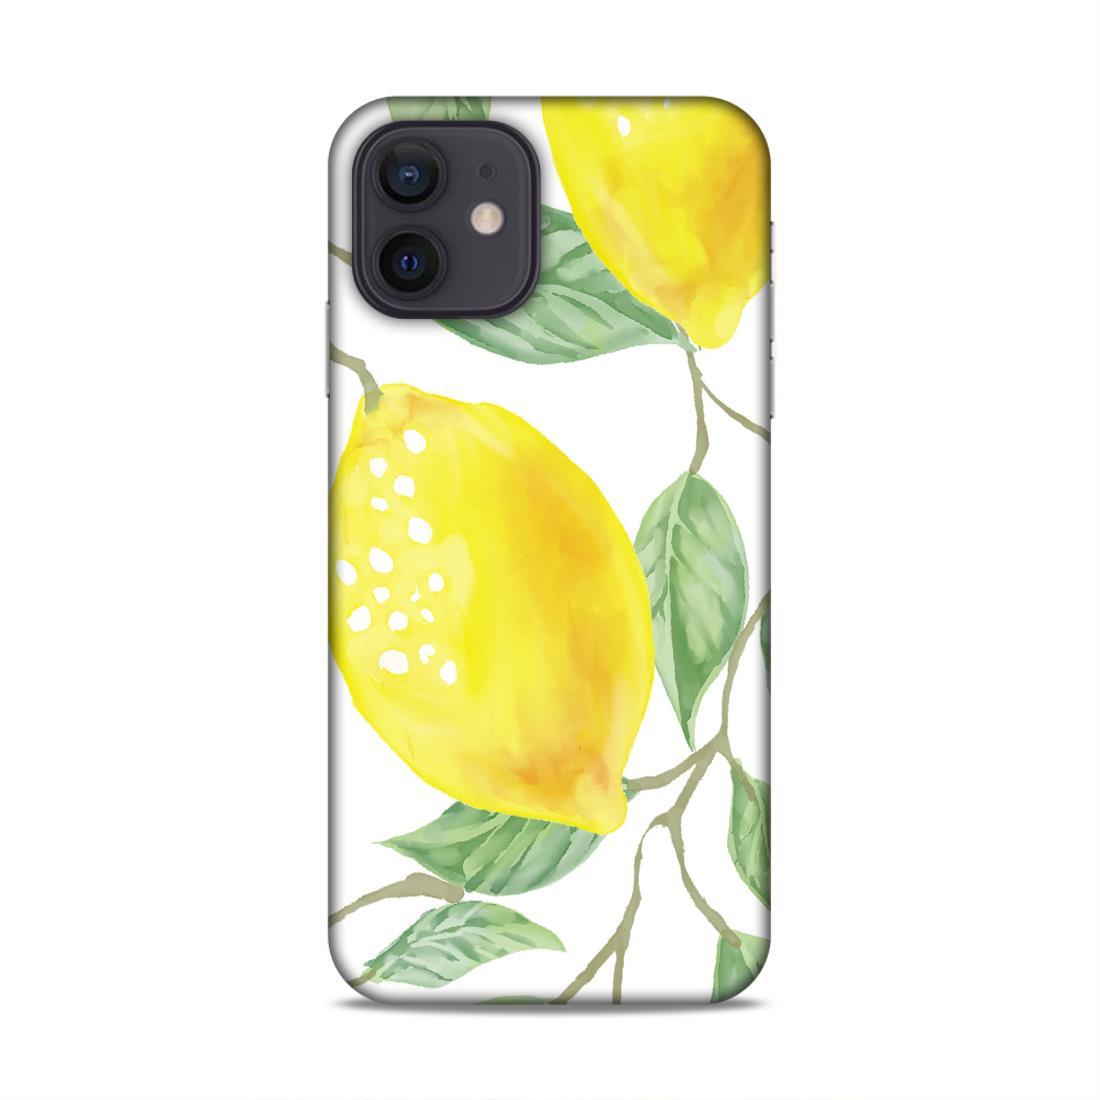 Mango Waterpainting iPhone 12 Mobile Back Case